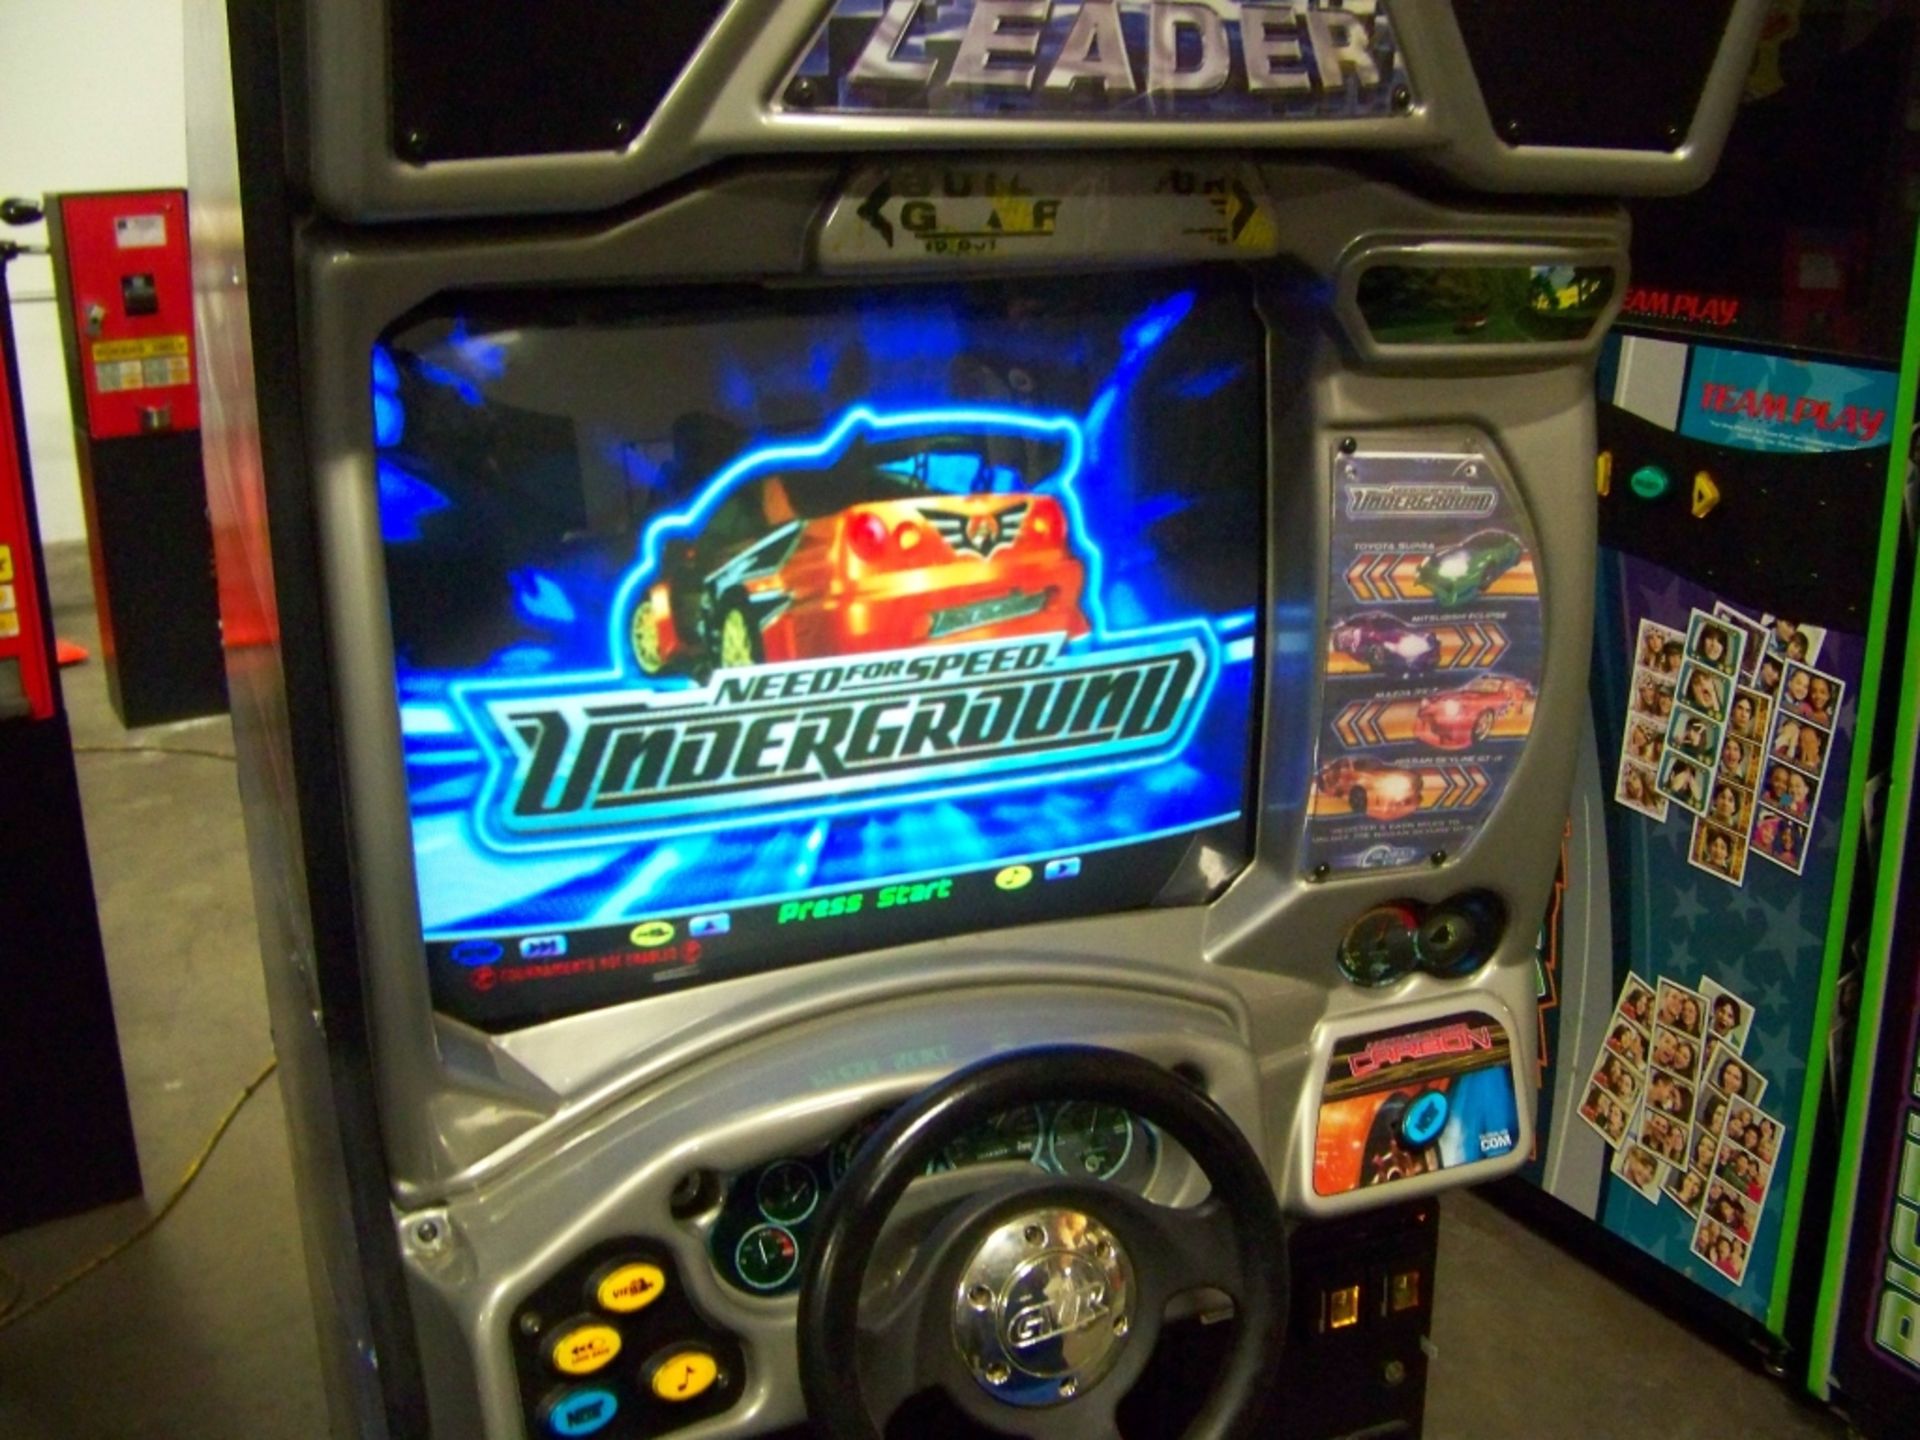 NEED FOR SPEED UNDERGROUND RACING ARCADE GAME - Image 2 of 7